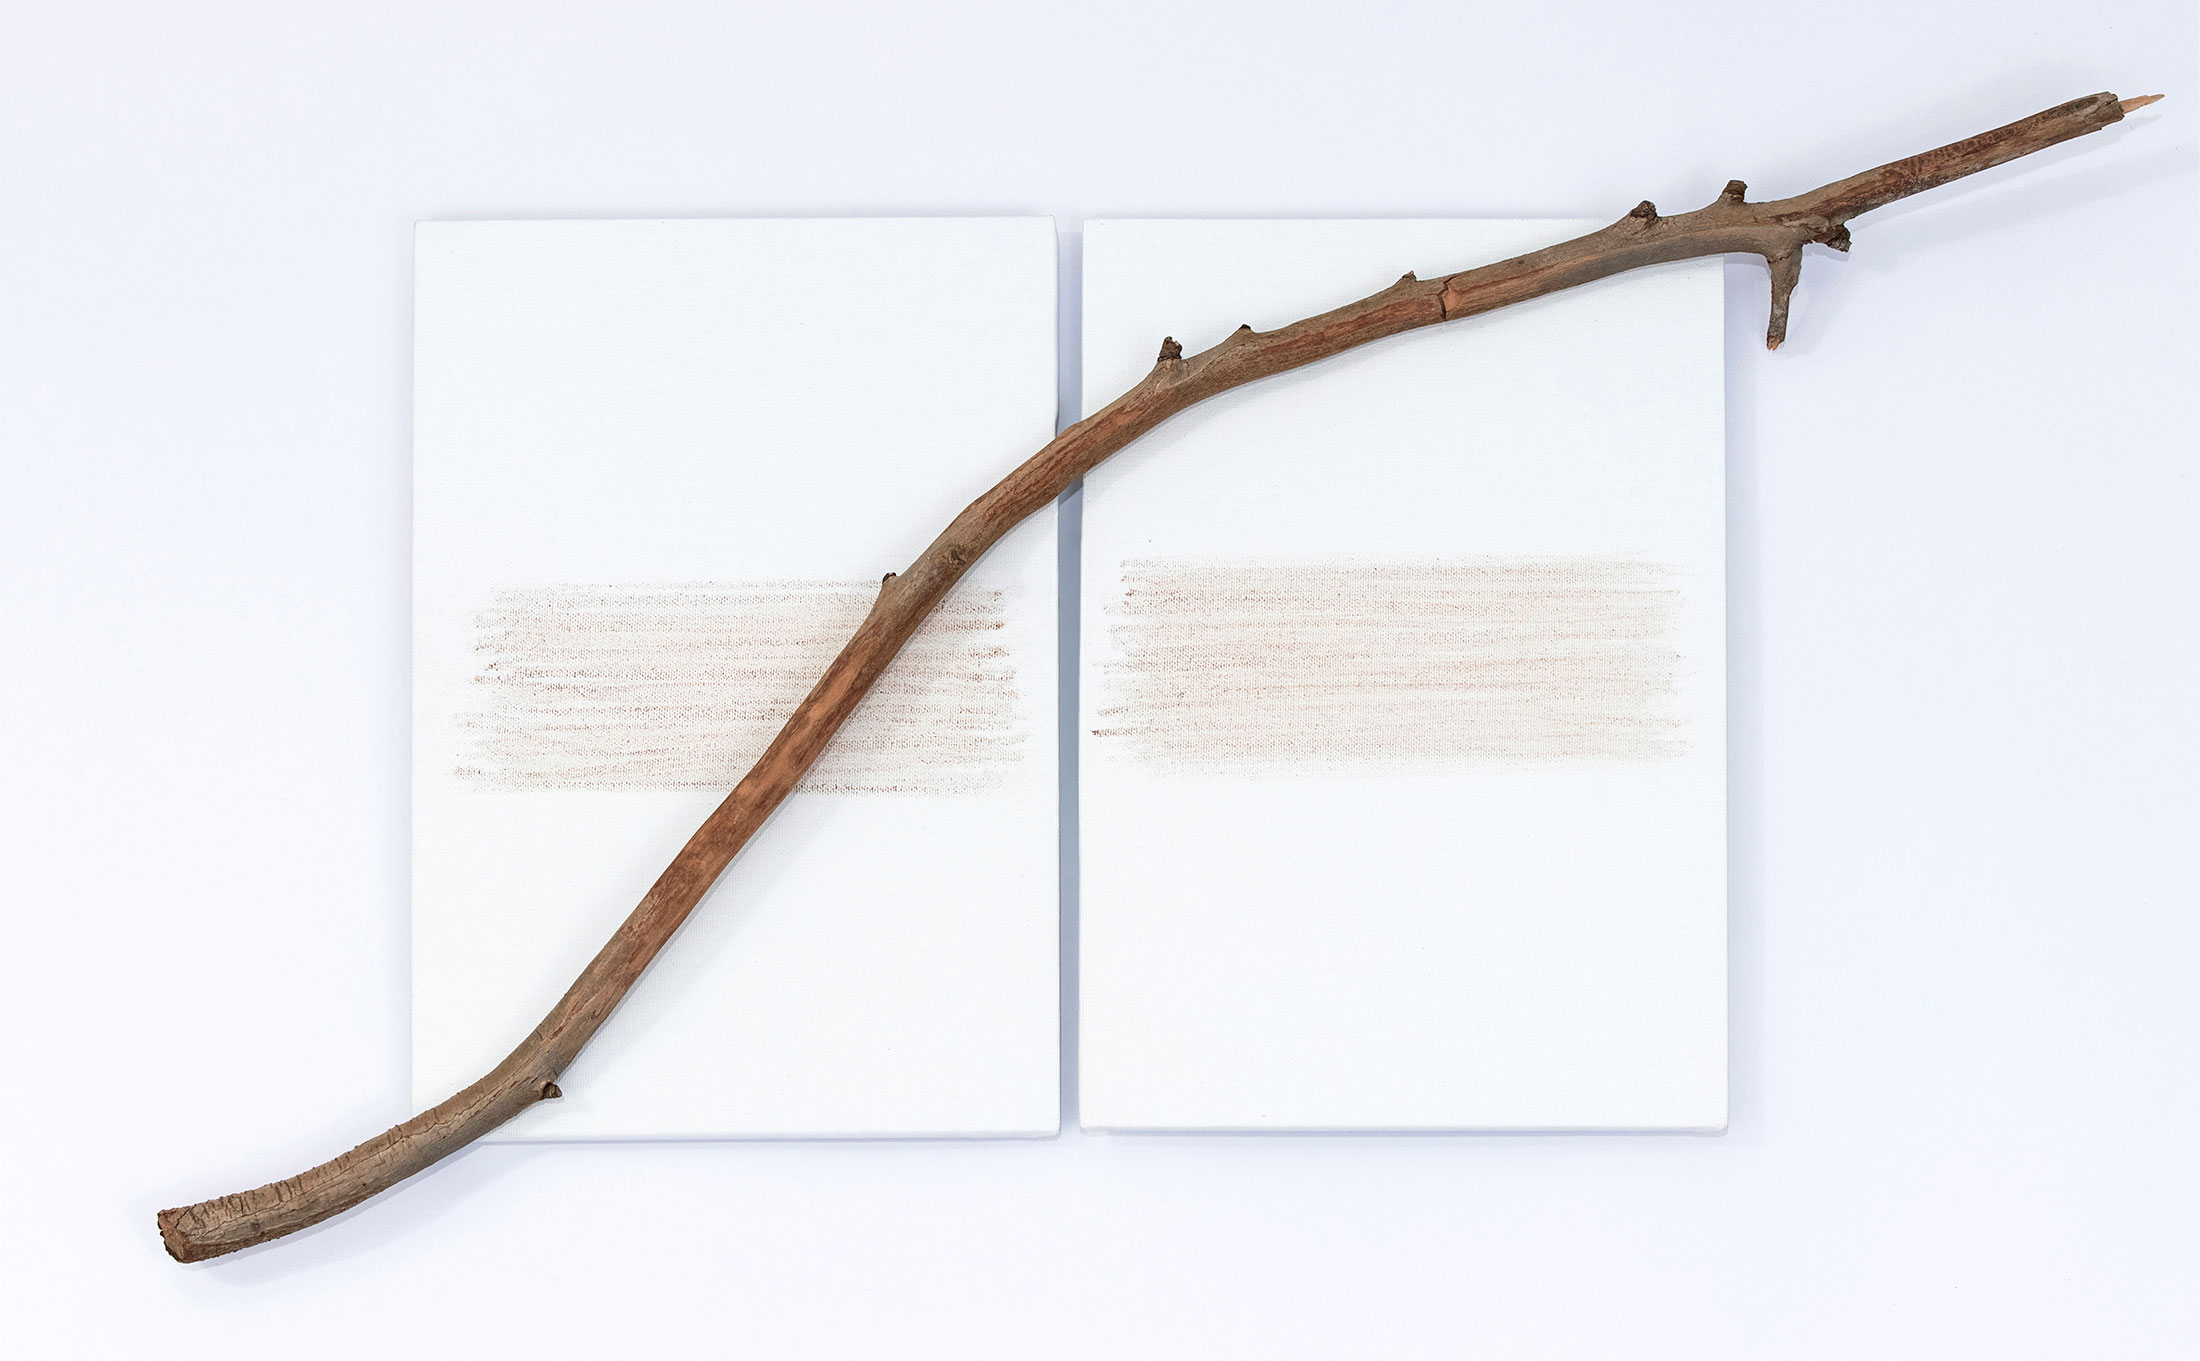 'Eucalyptus', assemblage (eucalyptus branch mounted on two canvas boards and natural pigment. Artwork by Francesca Virginia Coppola